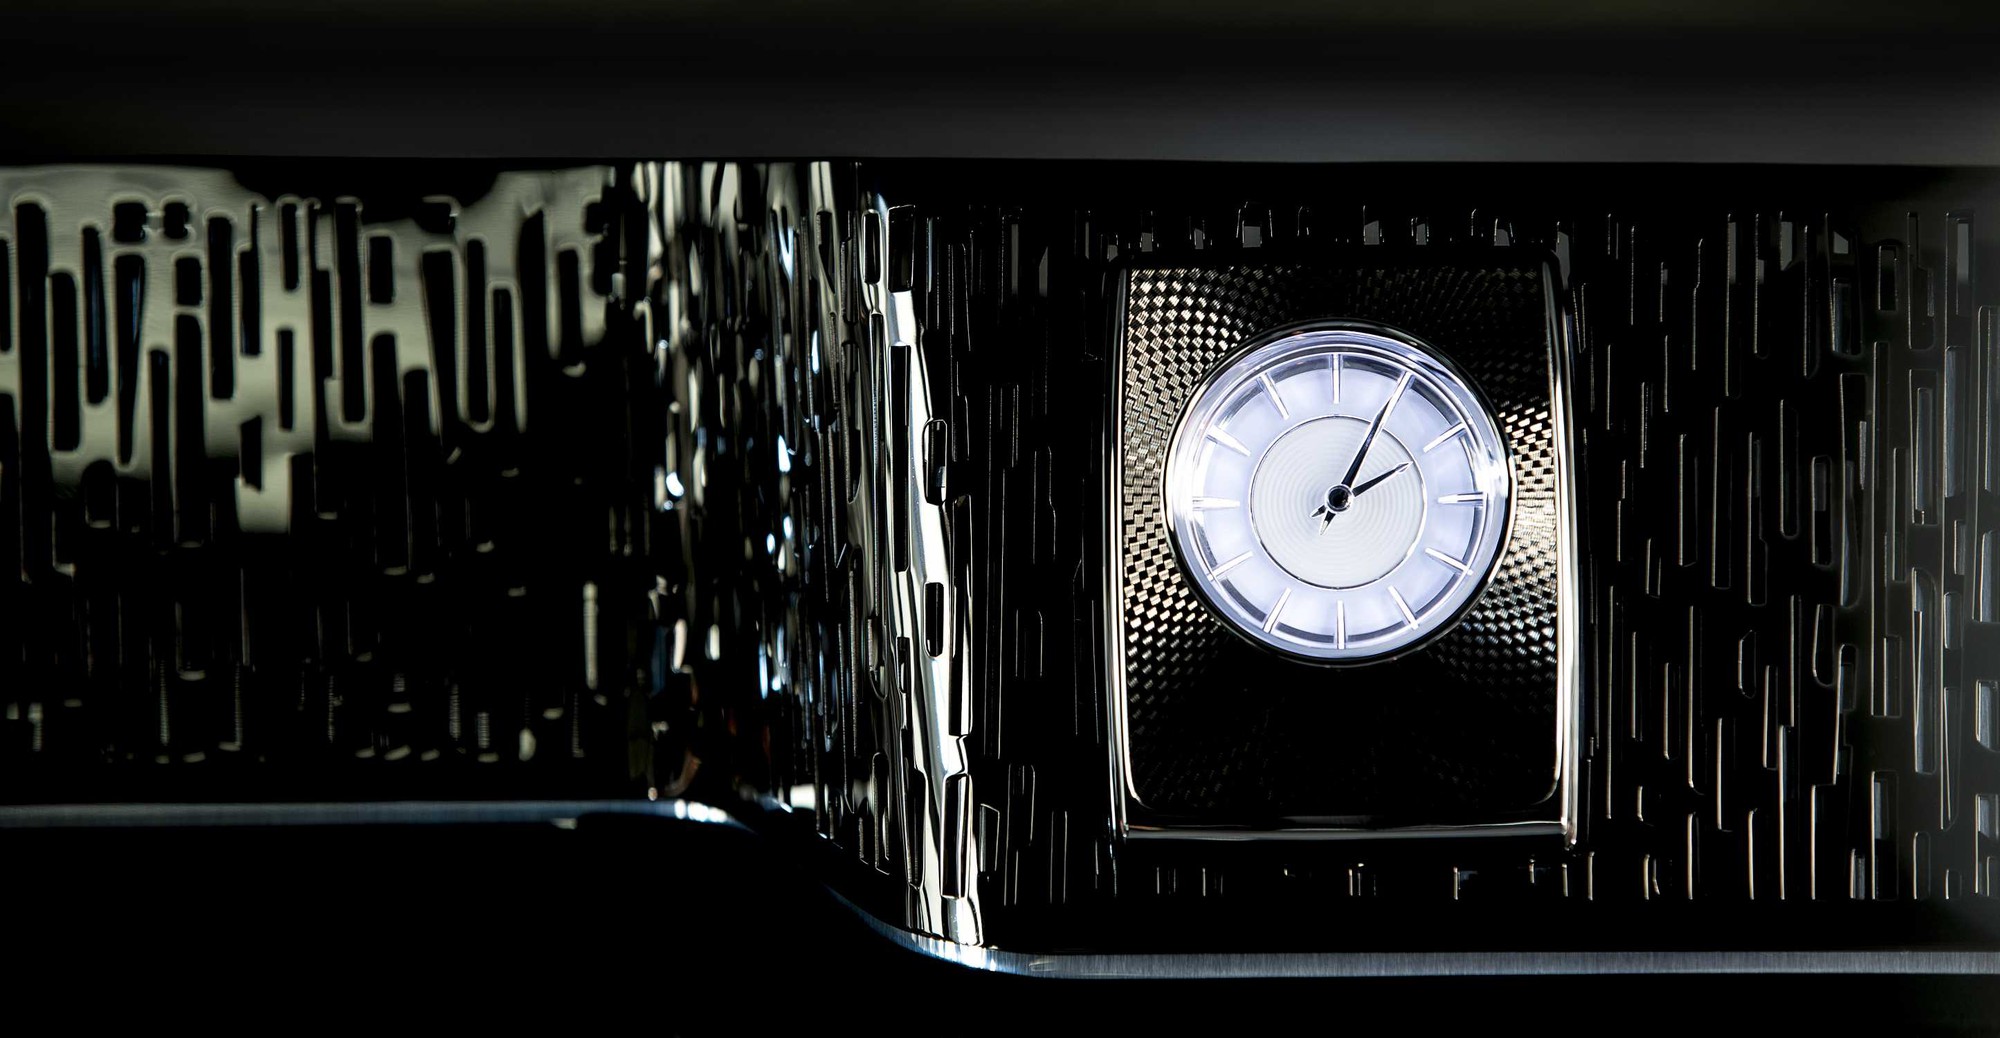 This custom RollsRoyce Phantom features 3000 shimmering feathers and a  motherofpearl clock  see inside